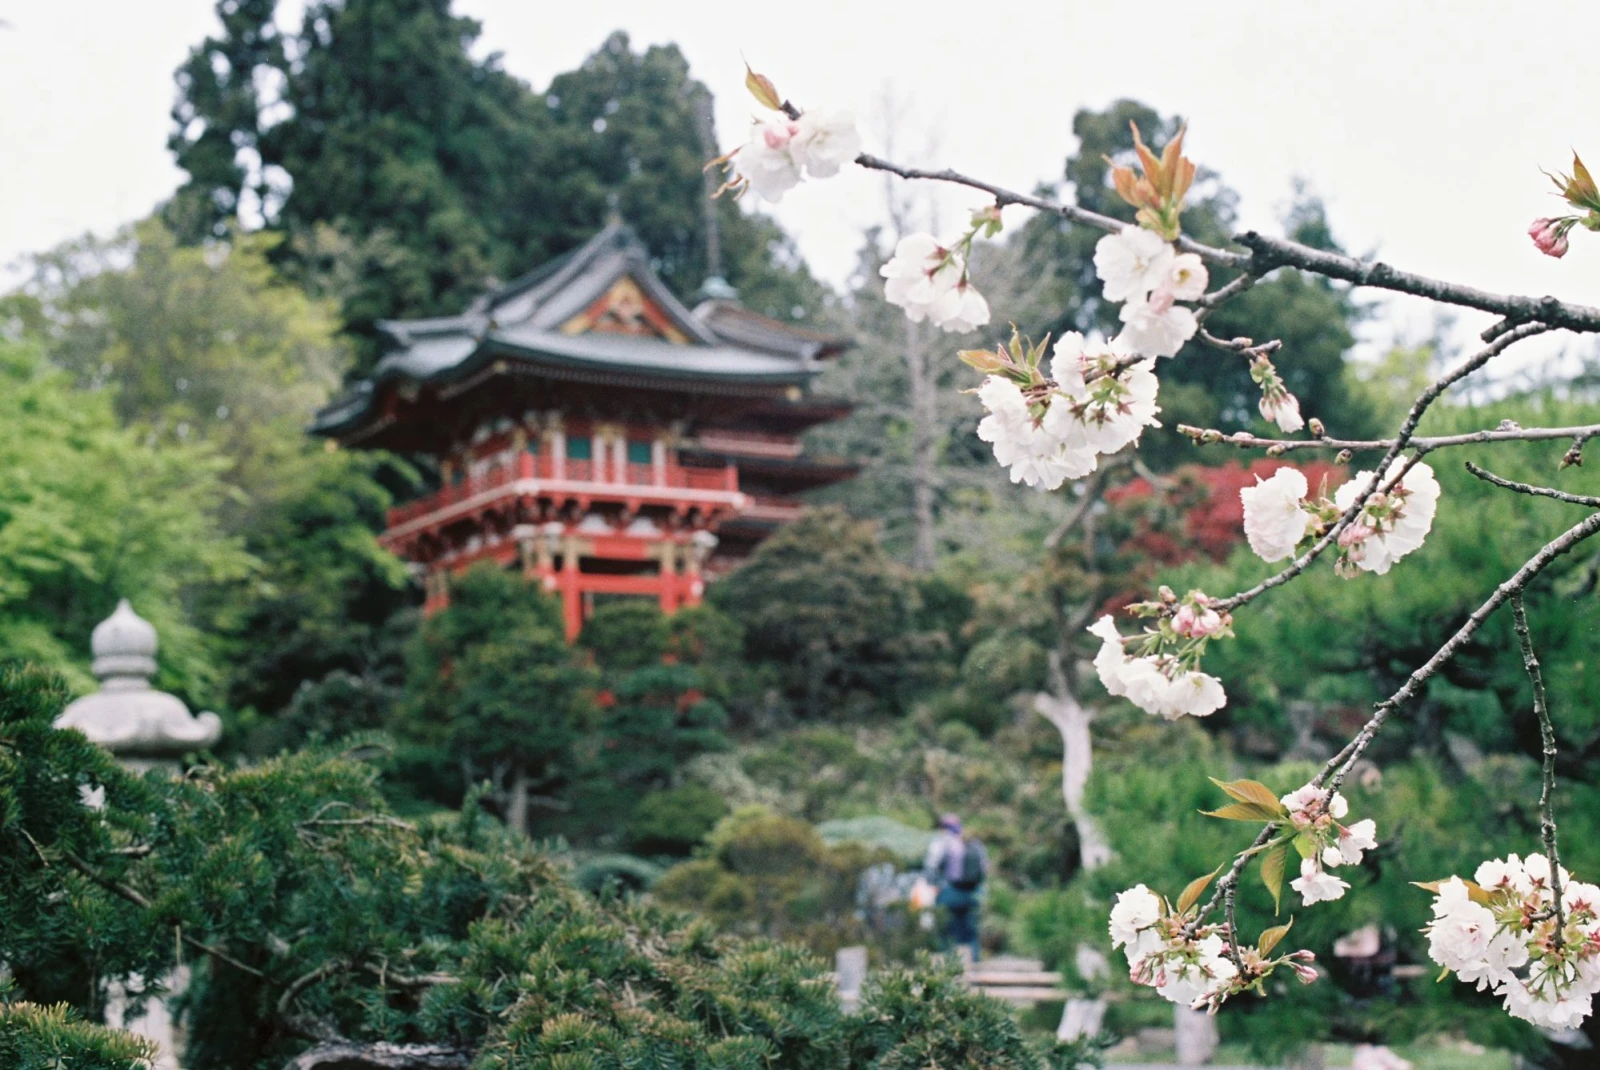 Japanese garden with cherry blossoms in the foreground